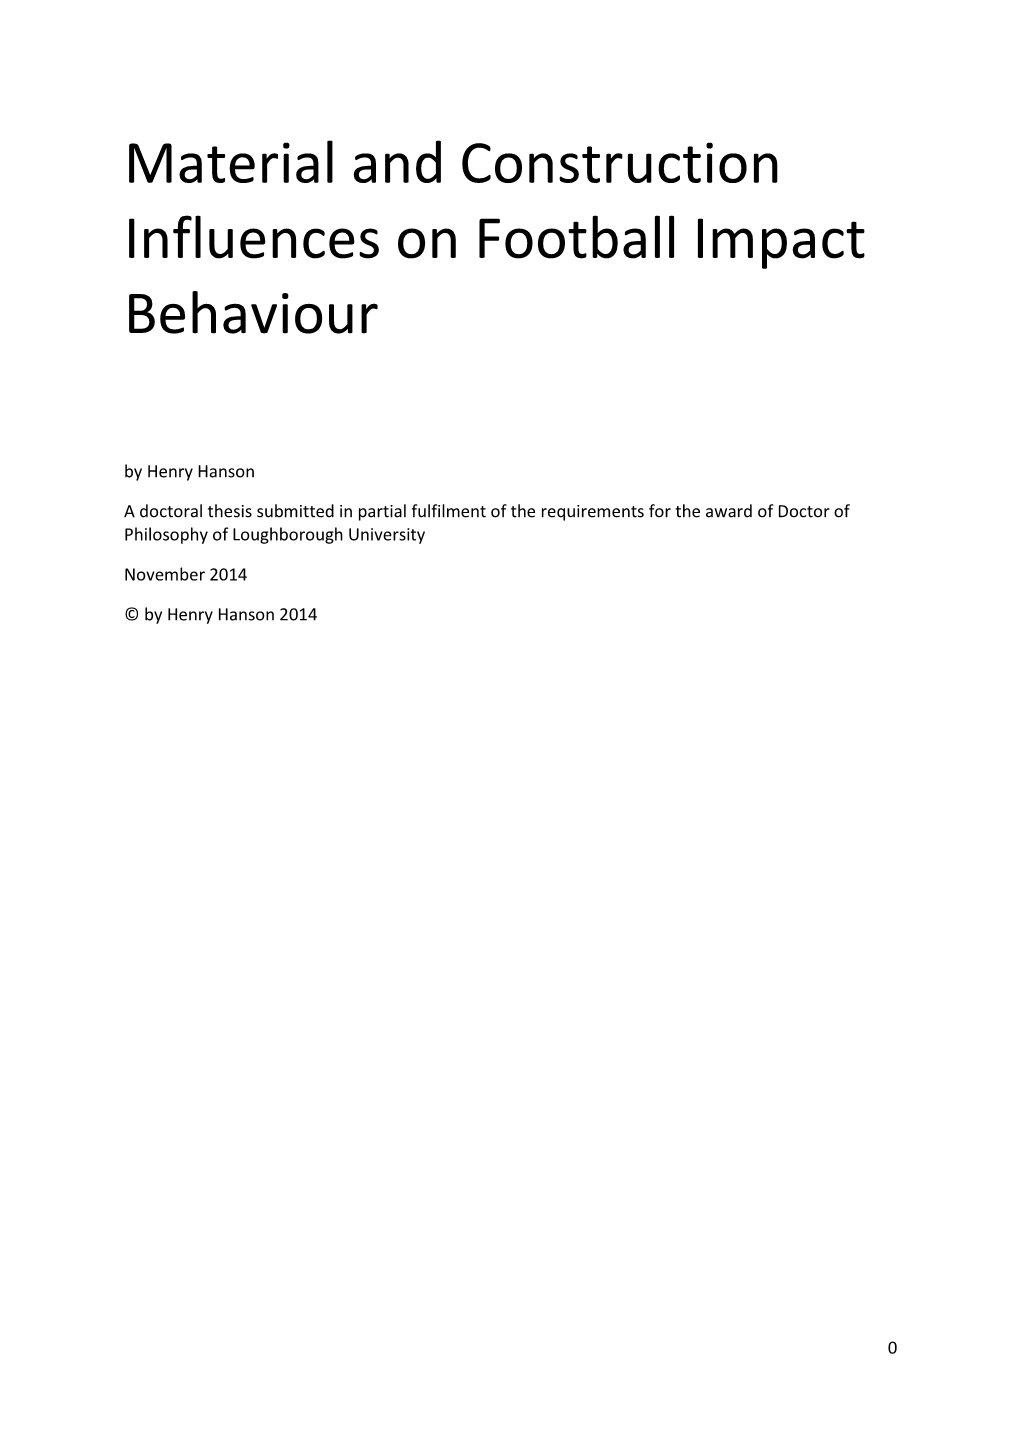 Material and Construction Influences on Football Impact Behaviour